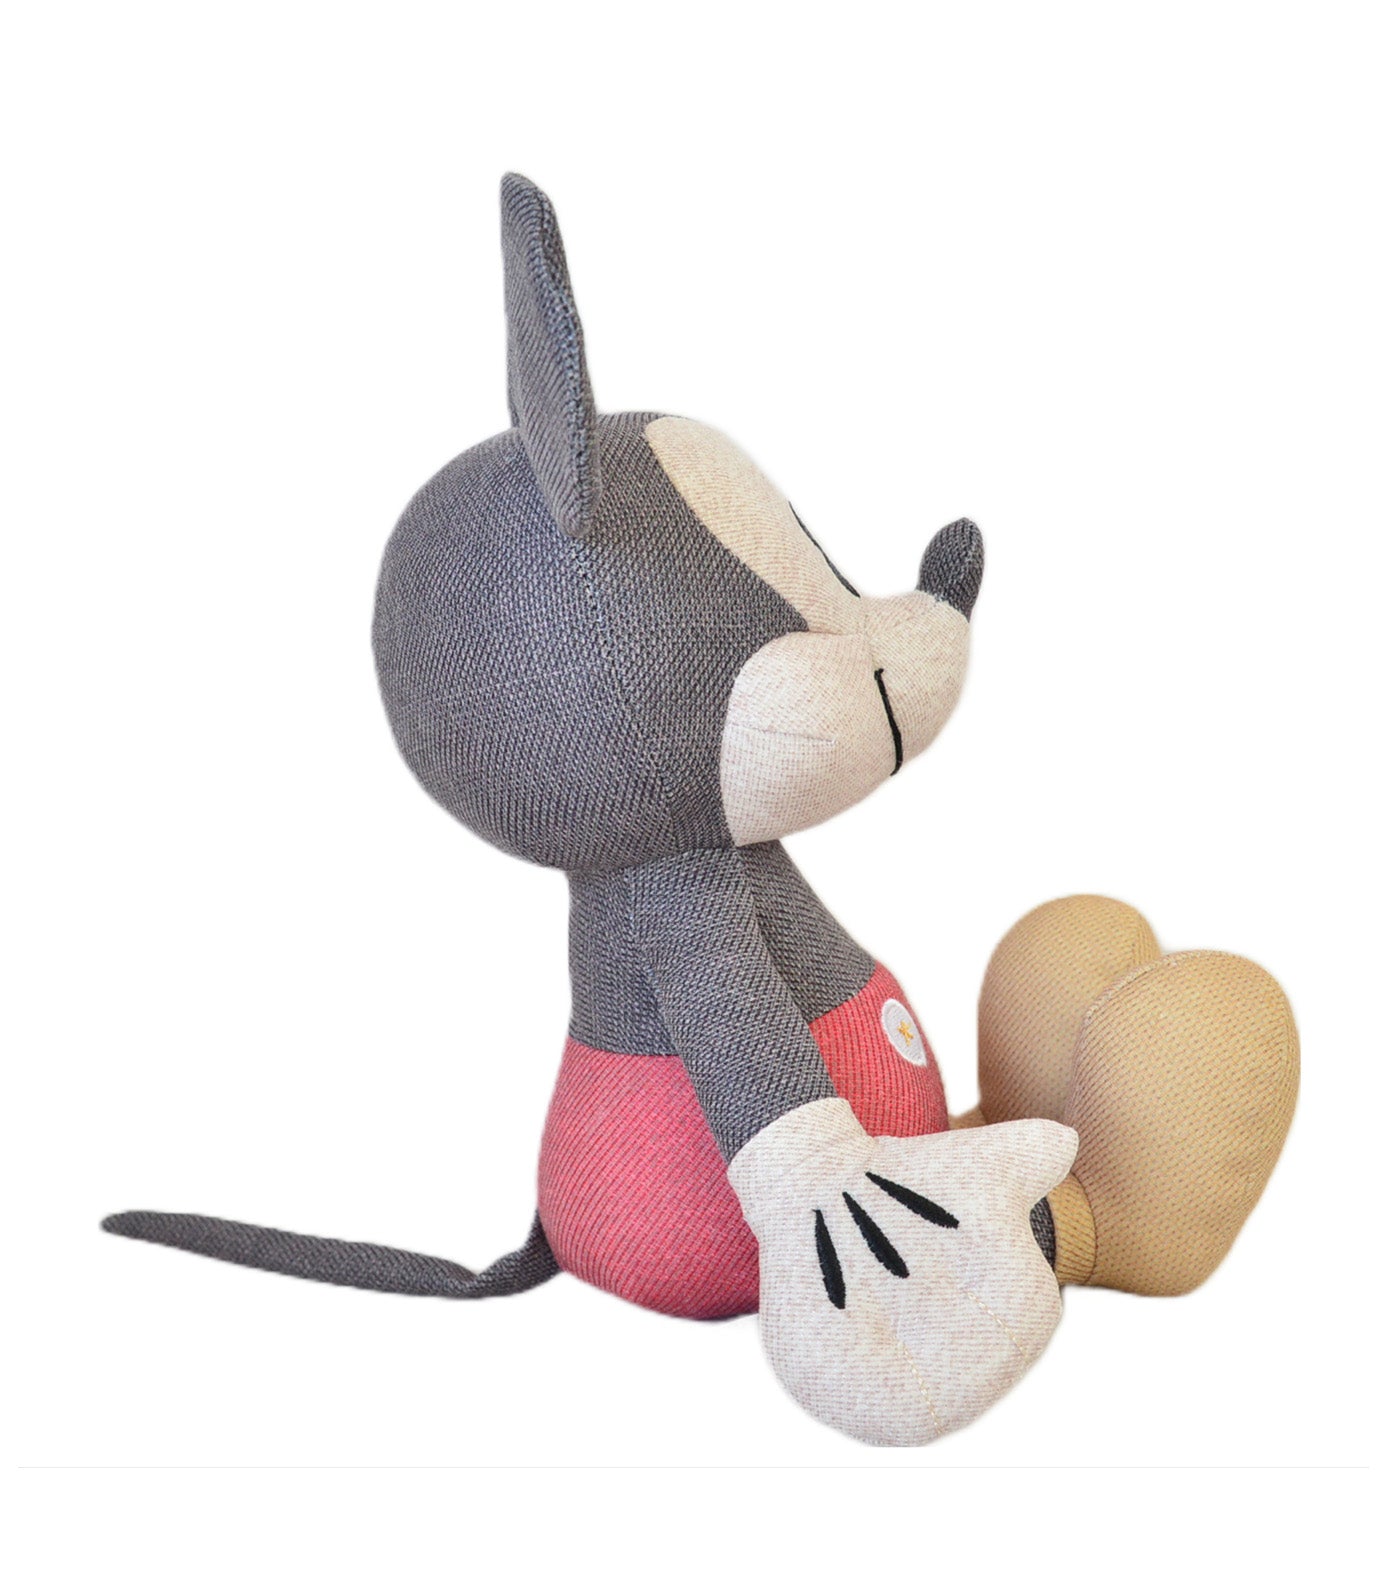 D100 Vintage Collection Mickey Mouse Plush - 8in